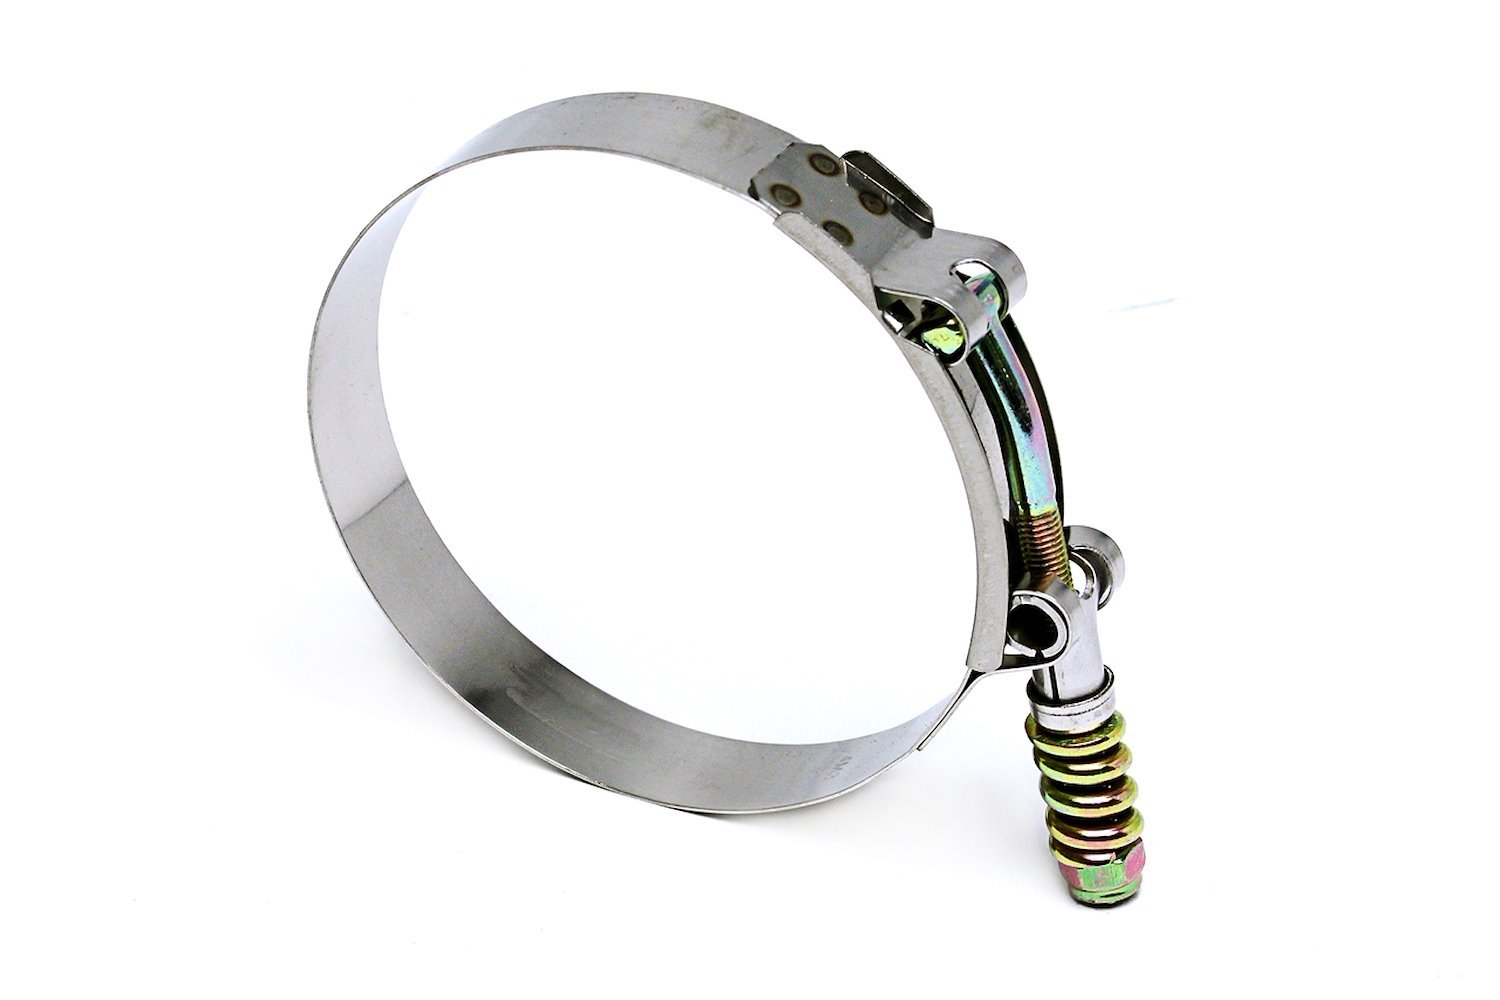 SLTC-362 Stainless Steel Spring Loaded T-Bolt Hose Clamp, Size #88, Range: 3.62 in.-3.94 in.